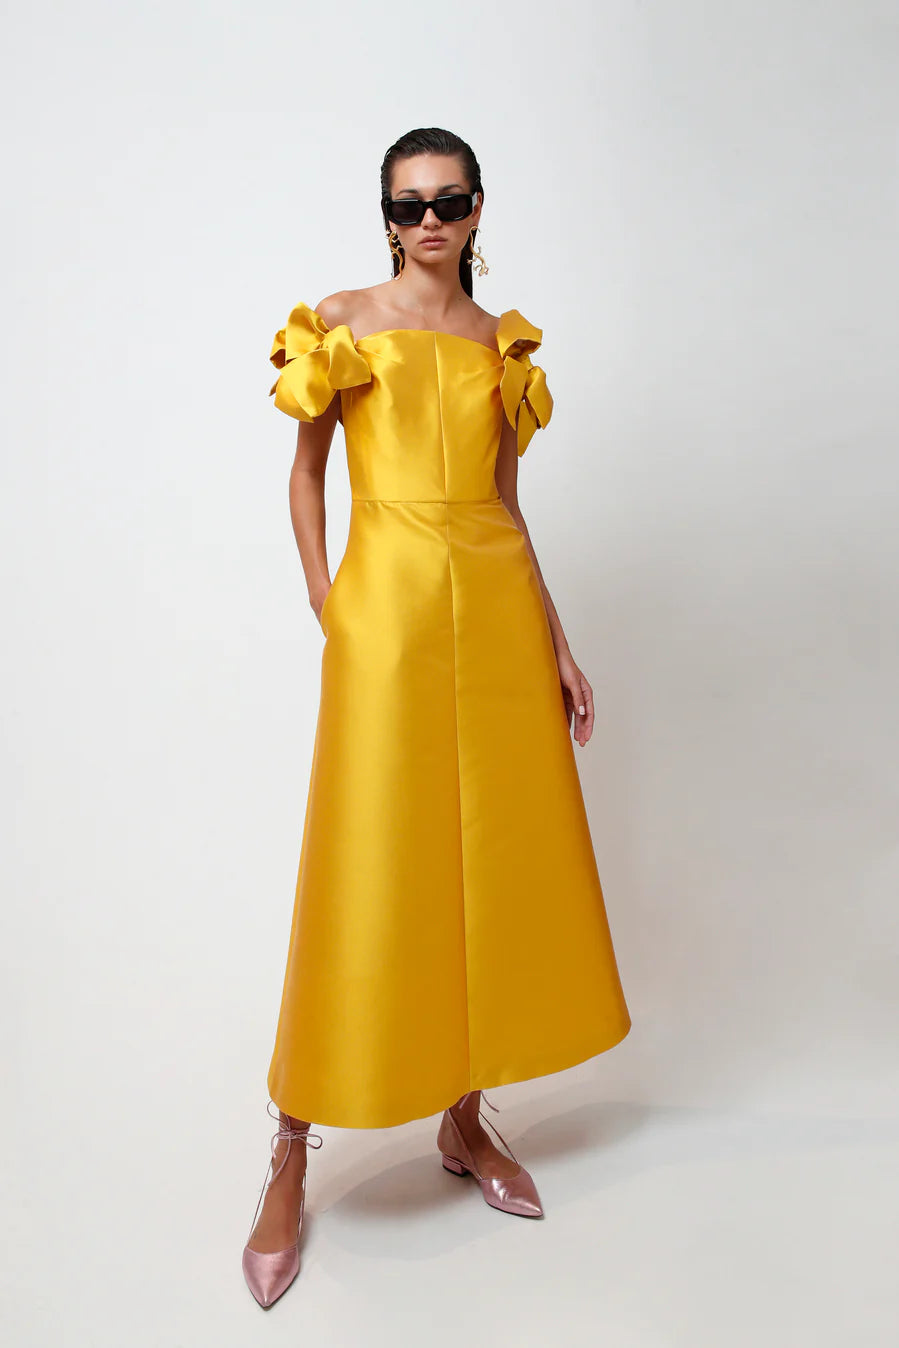 THE 2ND SKIN OFF THE SHOULDER DRESS WITH BOWS. Available in two colours - yellow and pink